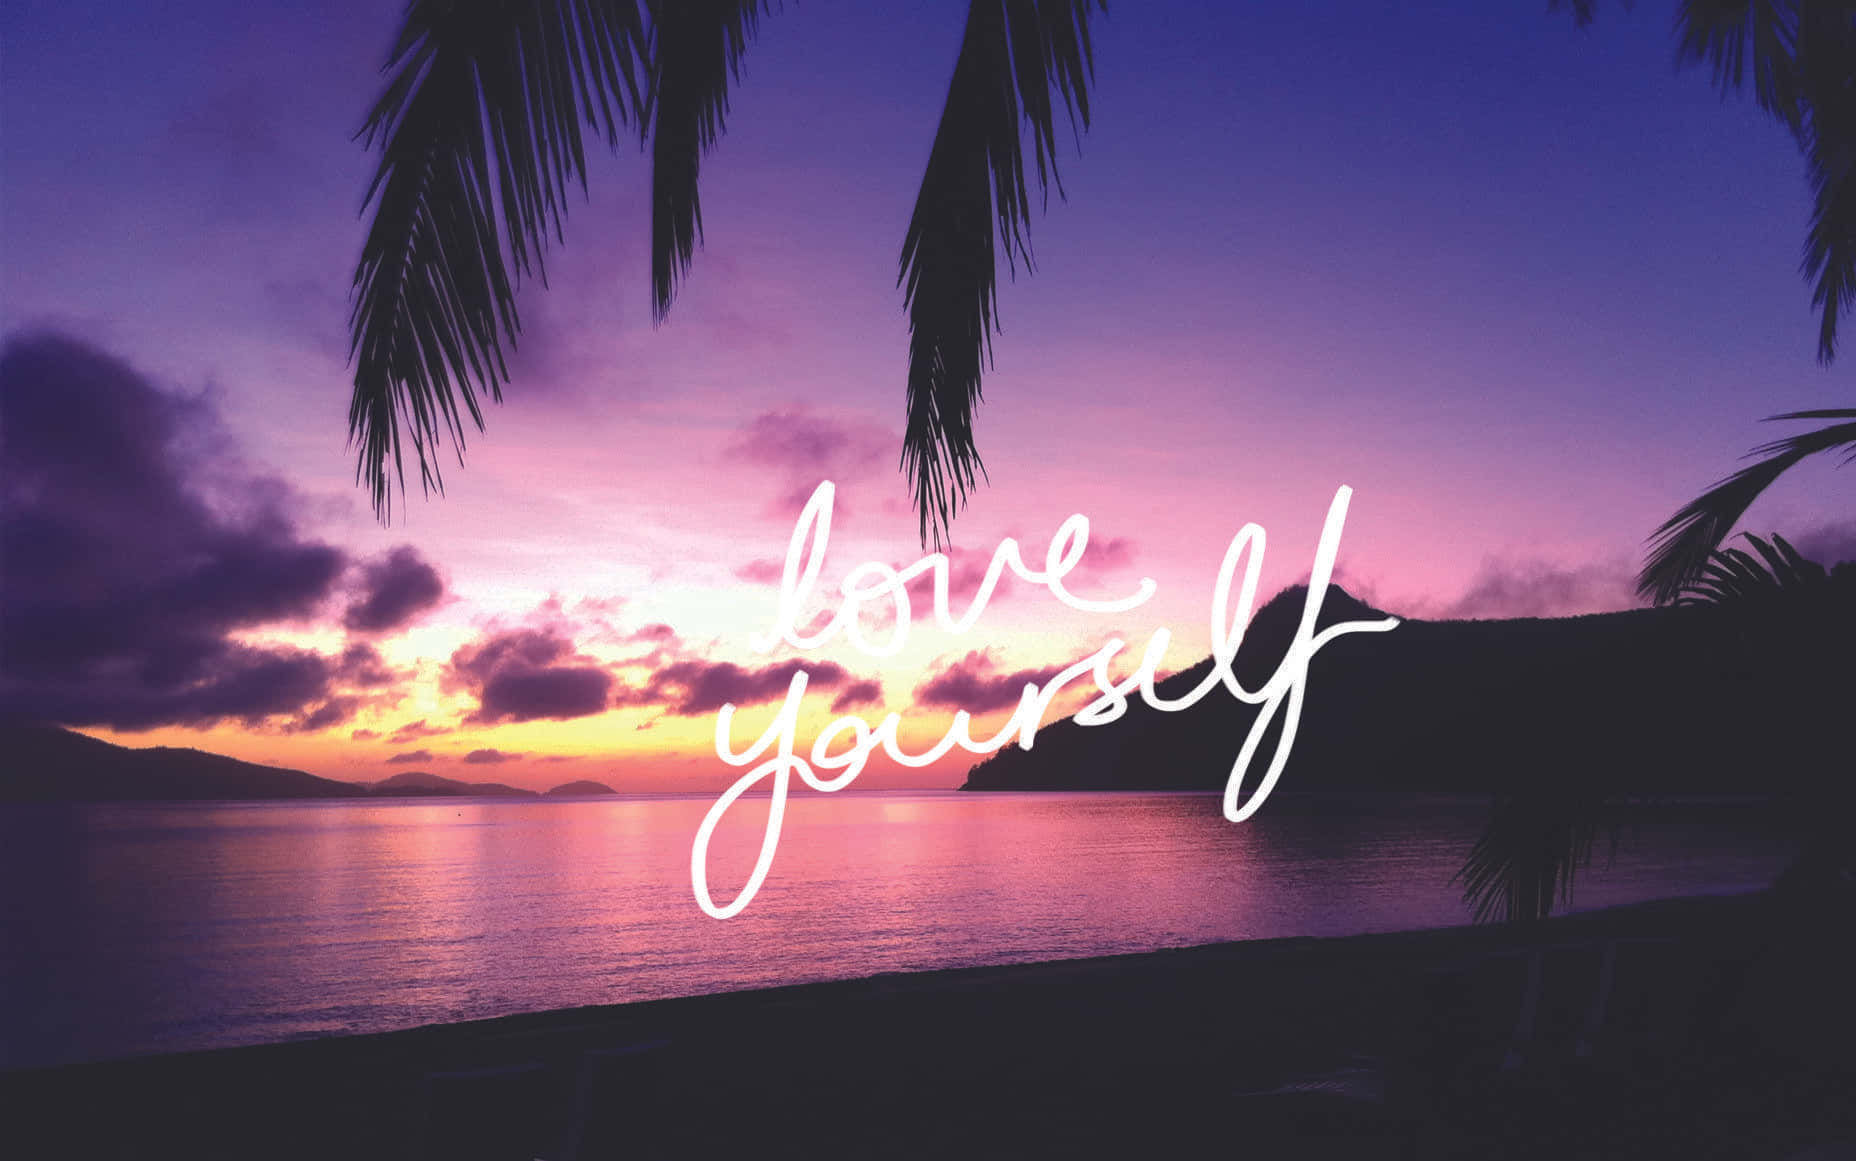 Love yourself and you will find contentment Wallpaper